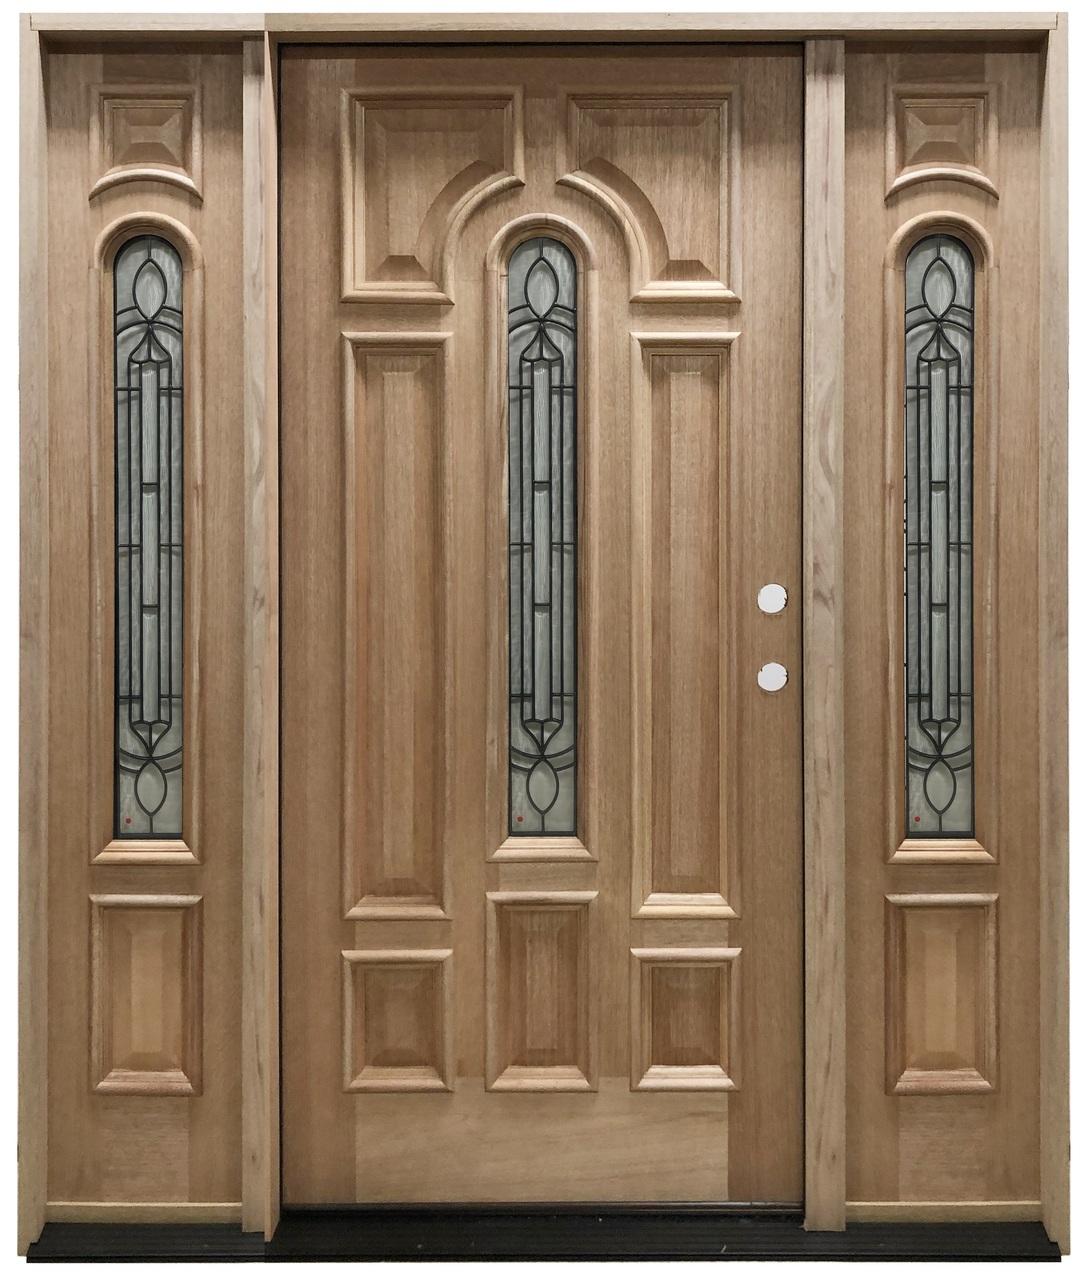 5 ft. 9 in. x 6 ft. 8 in. Mahogany Prehung Front Door with Leaded Glass And Two Sidelites